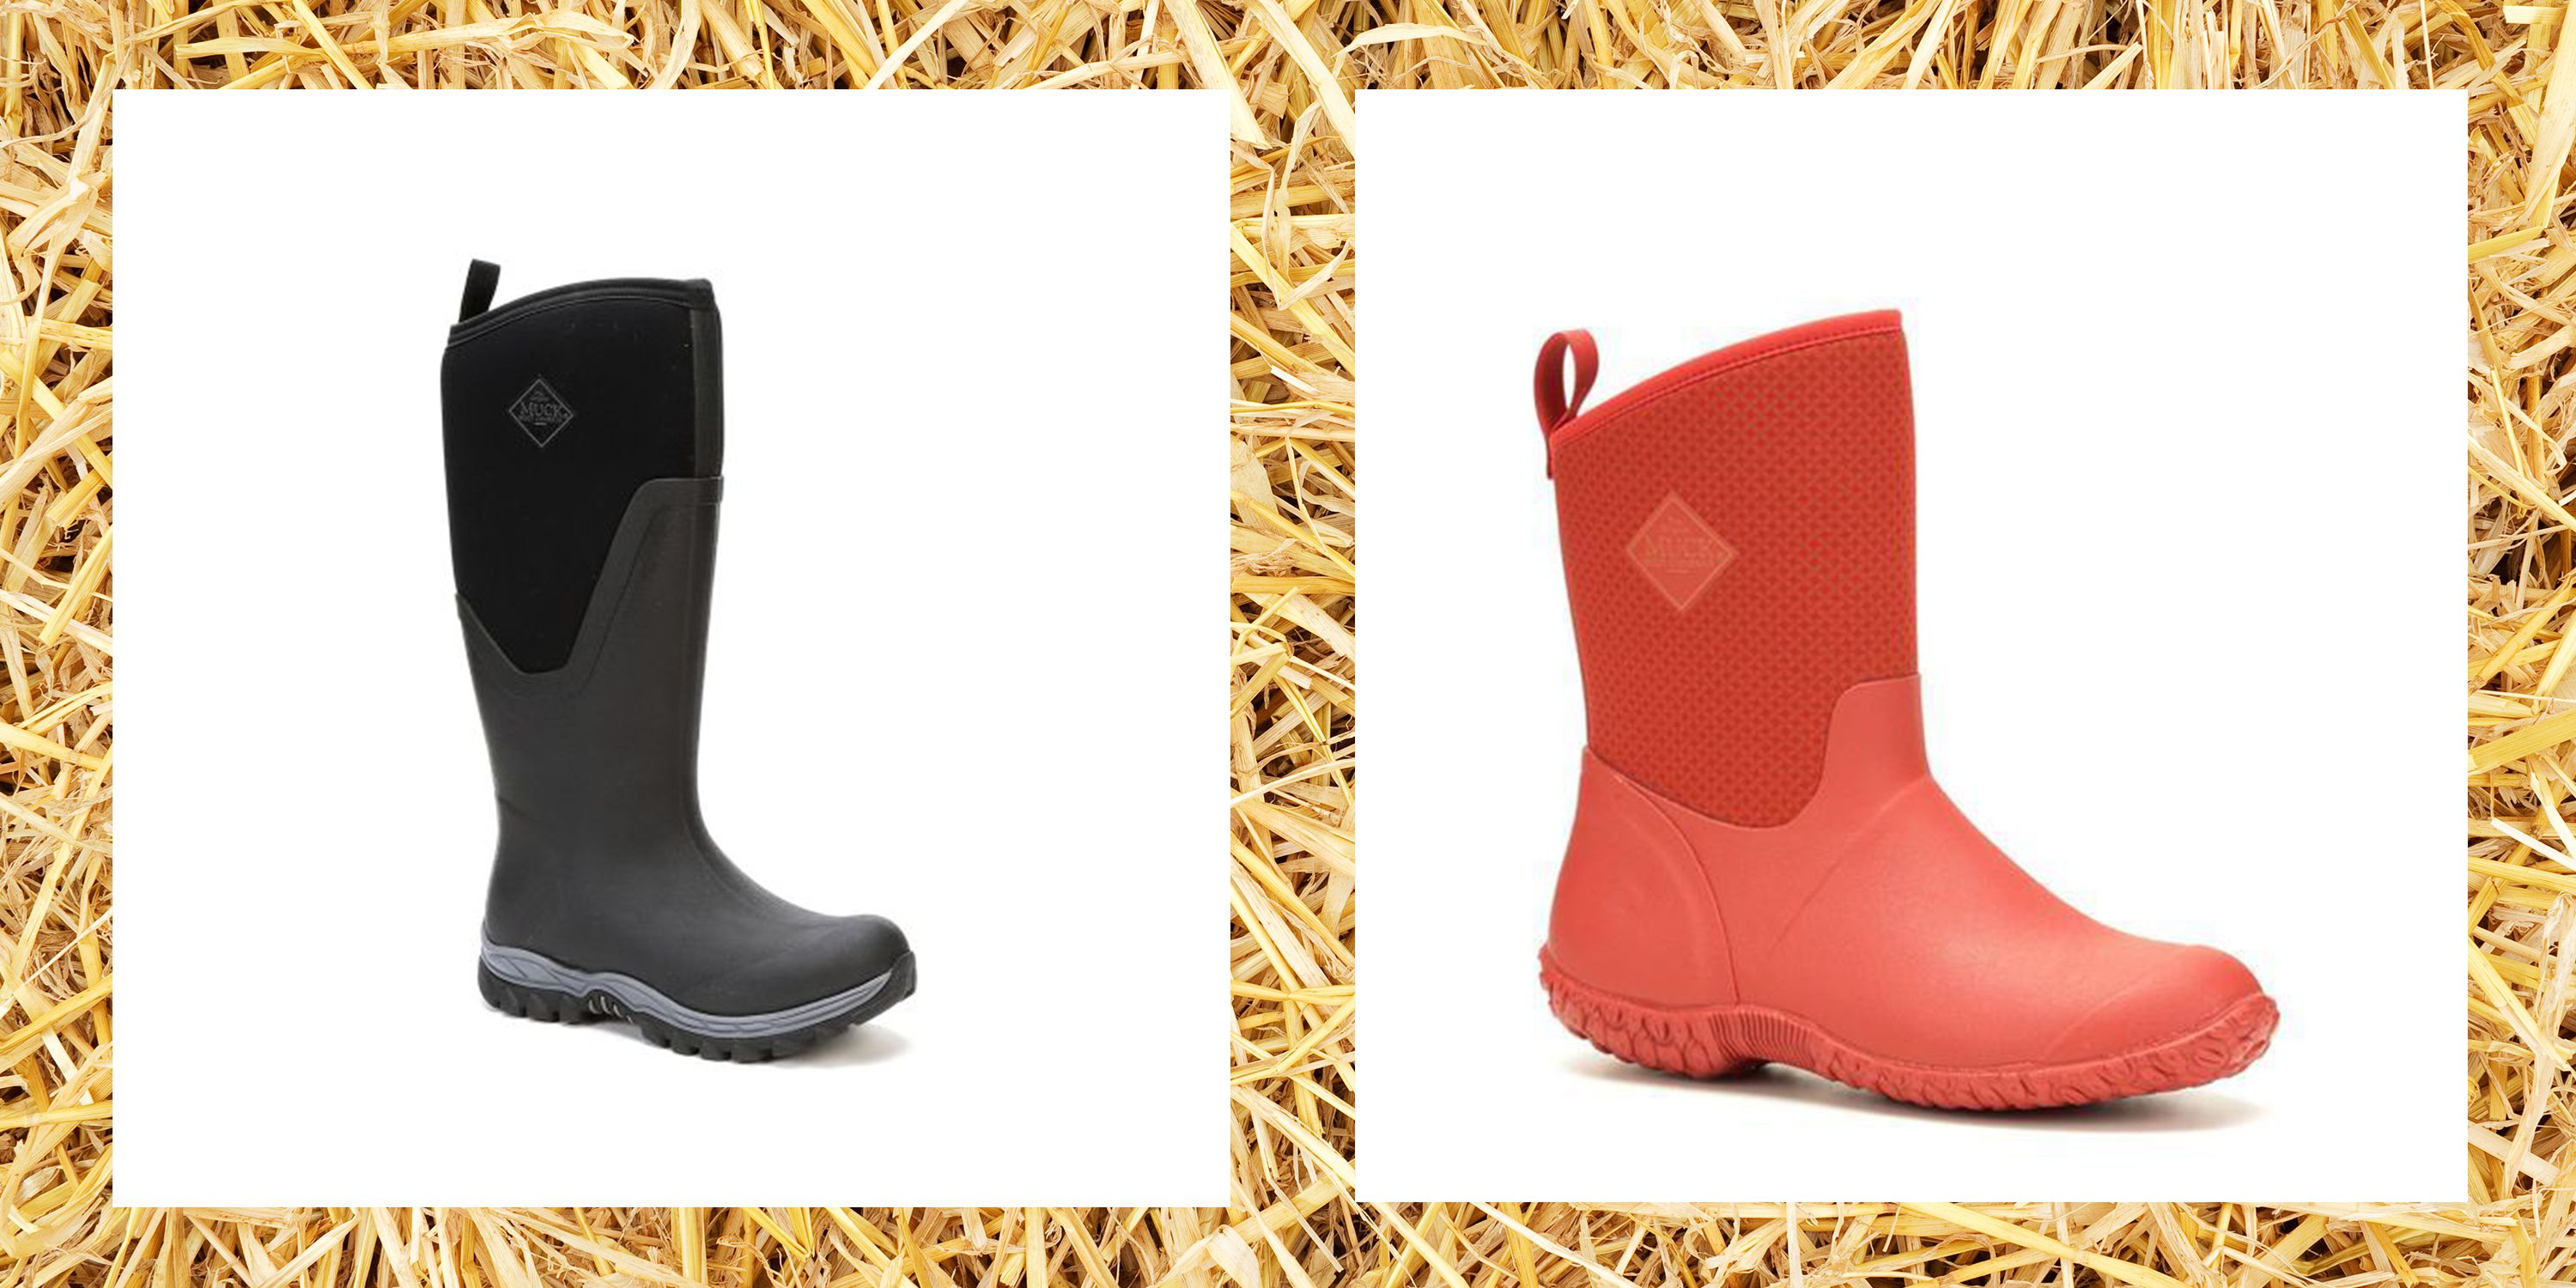 12 Best Muck Boots for Women in 2020 